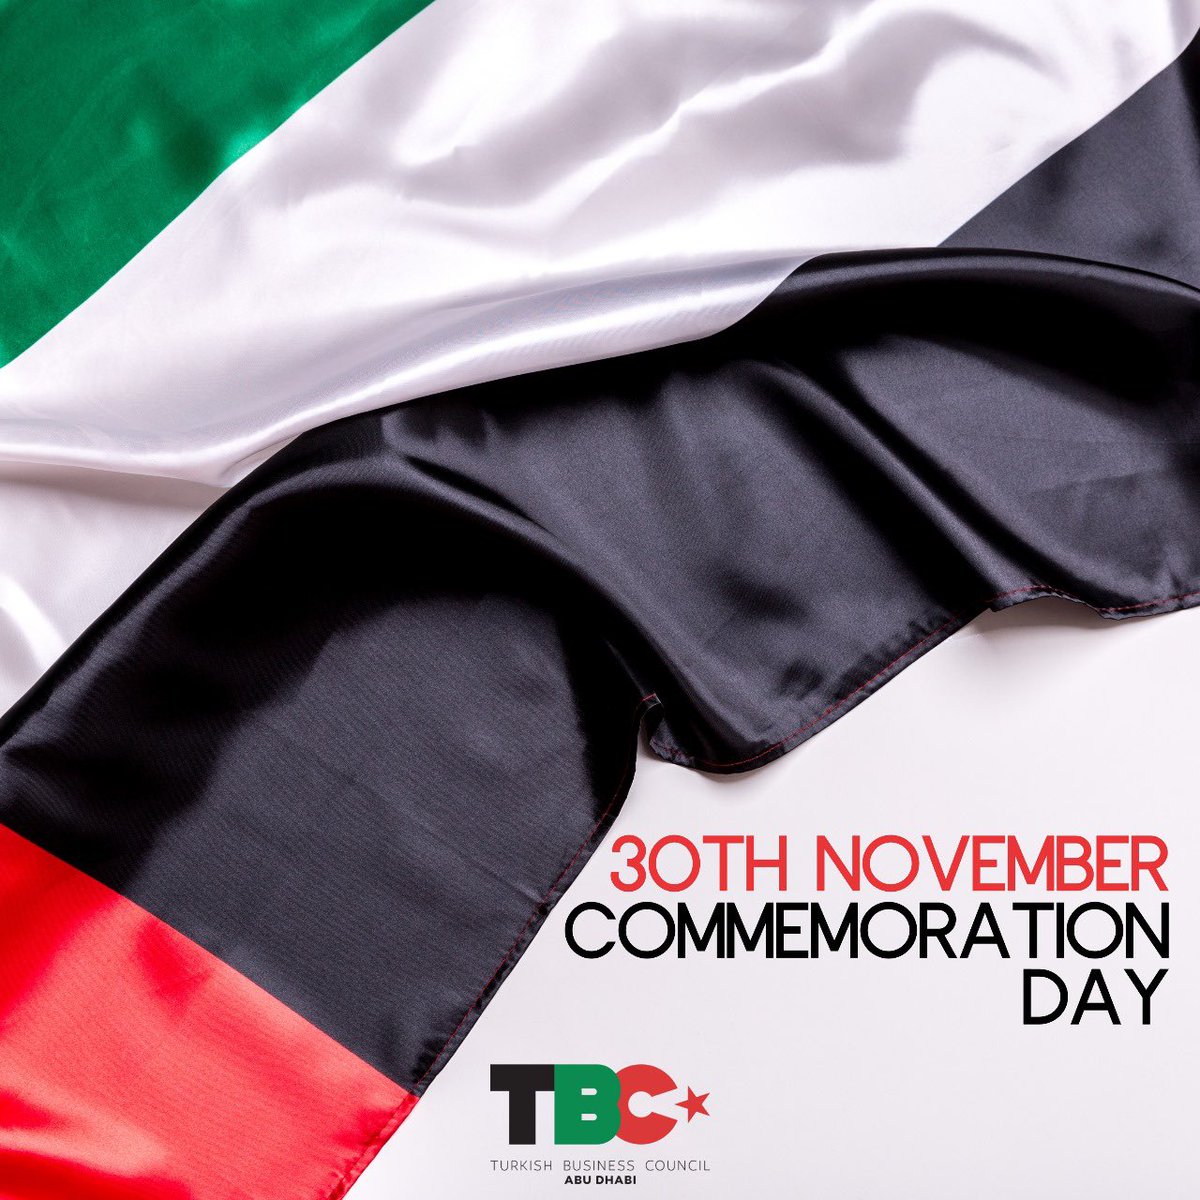 Today, on UAE's Commemoration Day, we stand together to honor the brave souls who made the ultimate sacrifice for the nation. Their determined dedication and sacrifice will never be forgotten. 🕊️🙏 #CommemorationDay #UAEHeroes #NeverForget